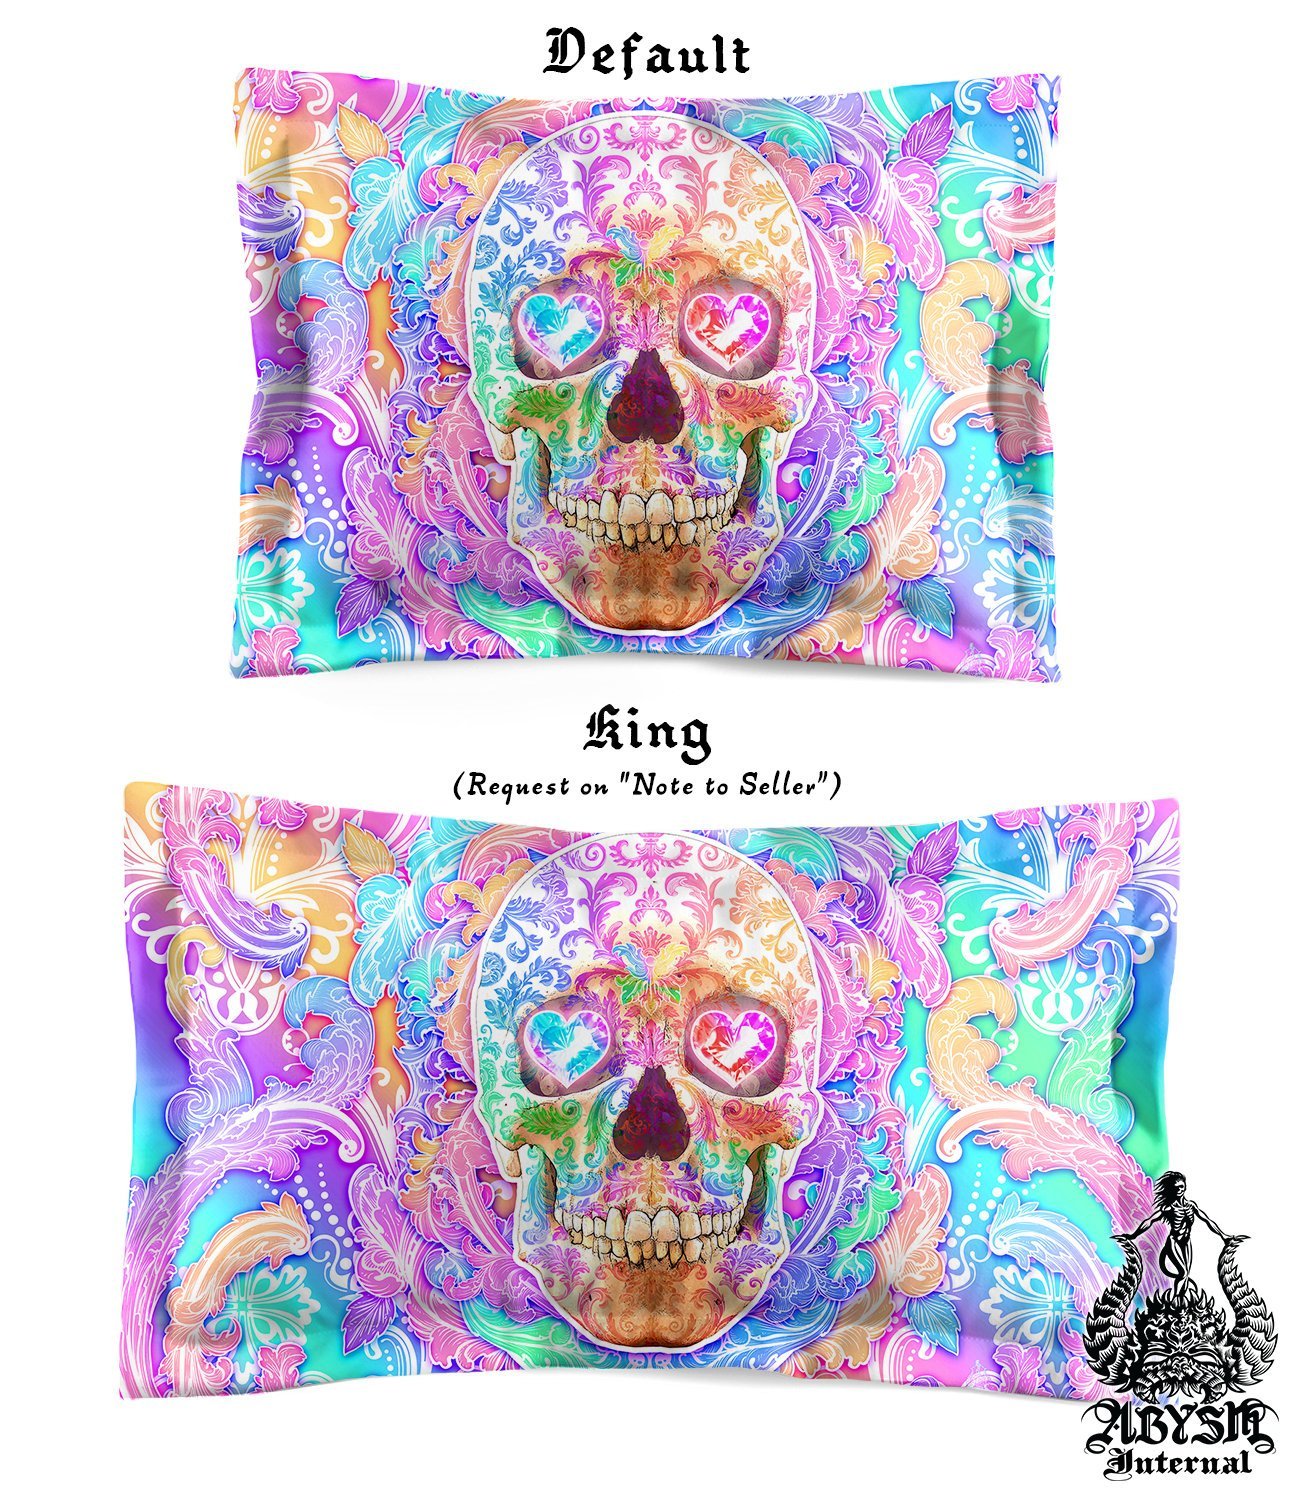 Pastel Horror Bedding Set, Comforter and Duvet, Psychedelic, Aesthetic Bed Cover, Kawaii Gamer Bedroom Decor, King, Queen and Twin Size - Skull - Abysm Internal